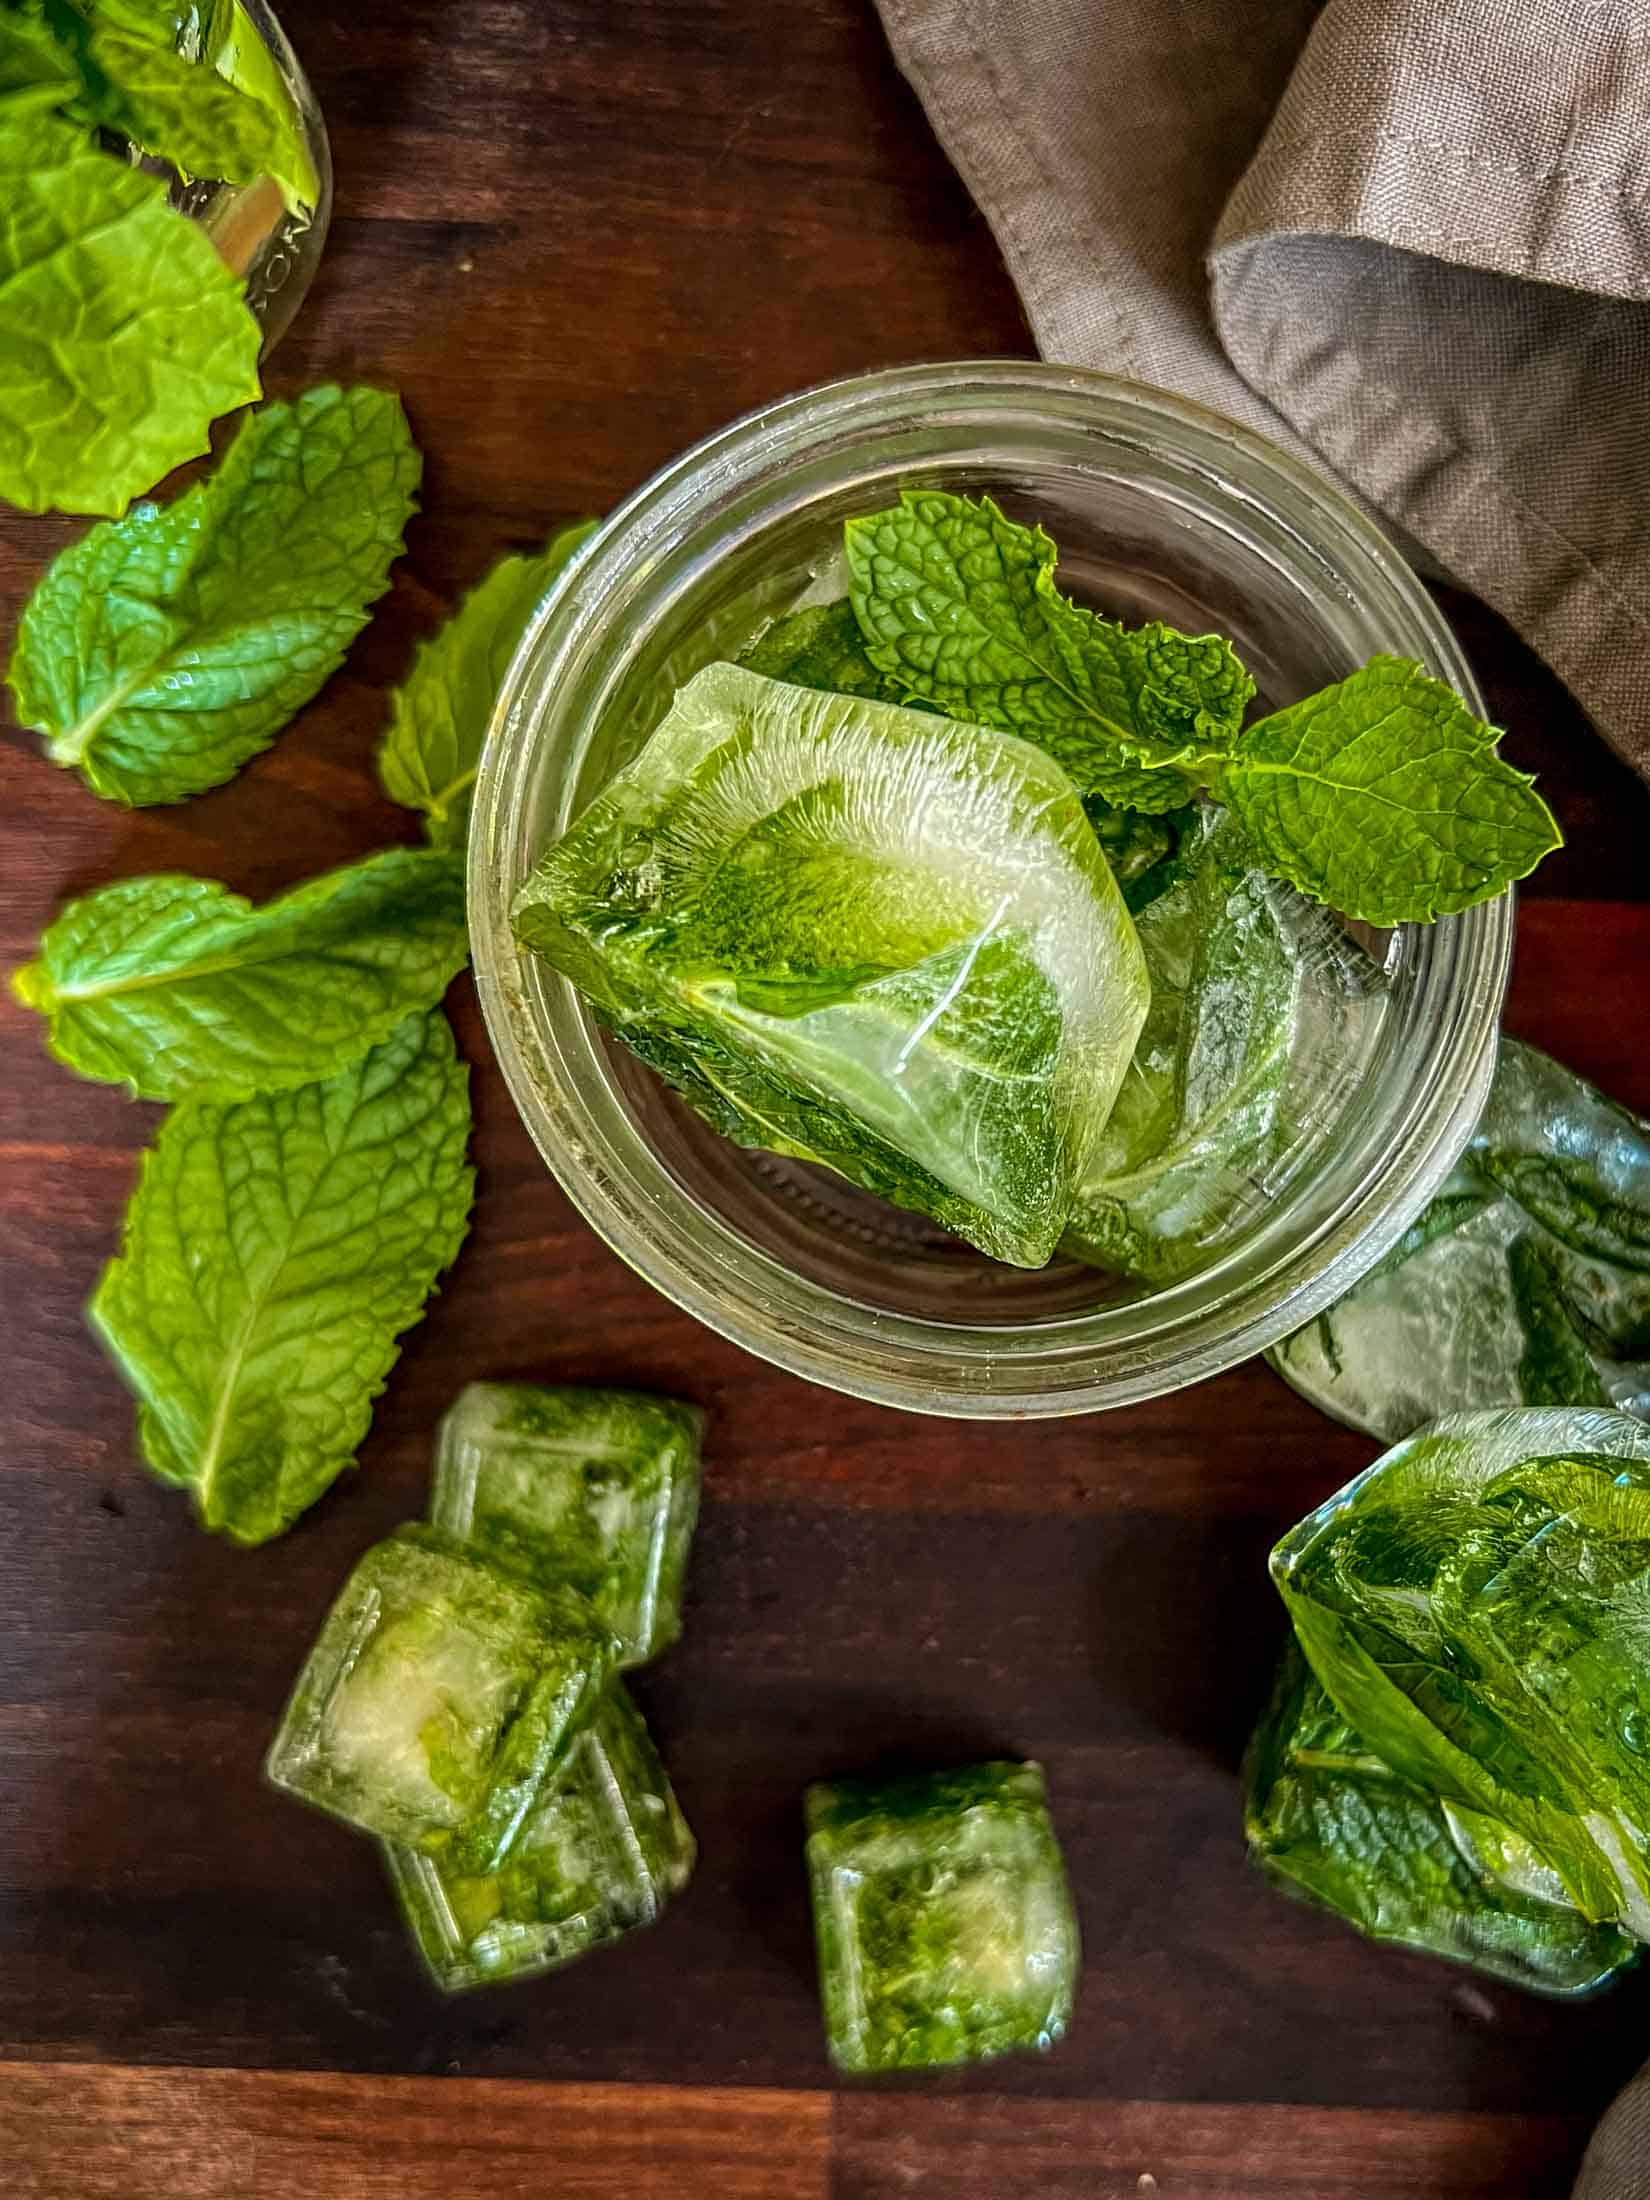 How To Freeze Mint 3 Ways | Whole Leaves, In Oil, In Water